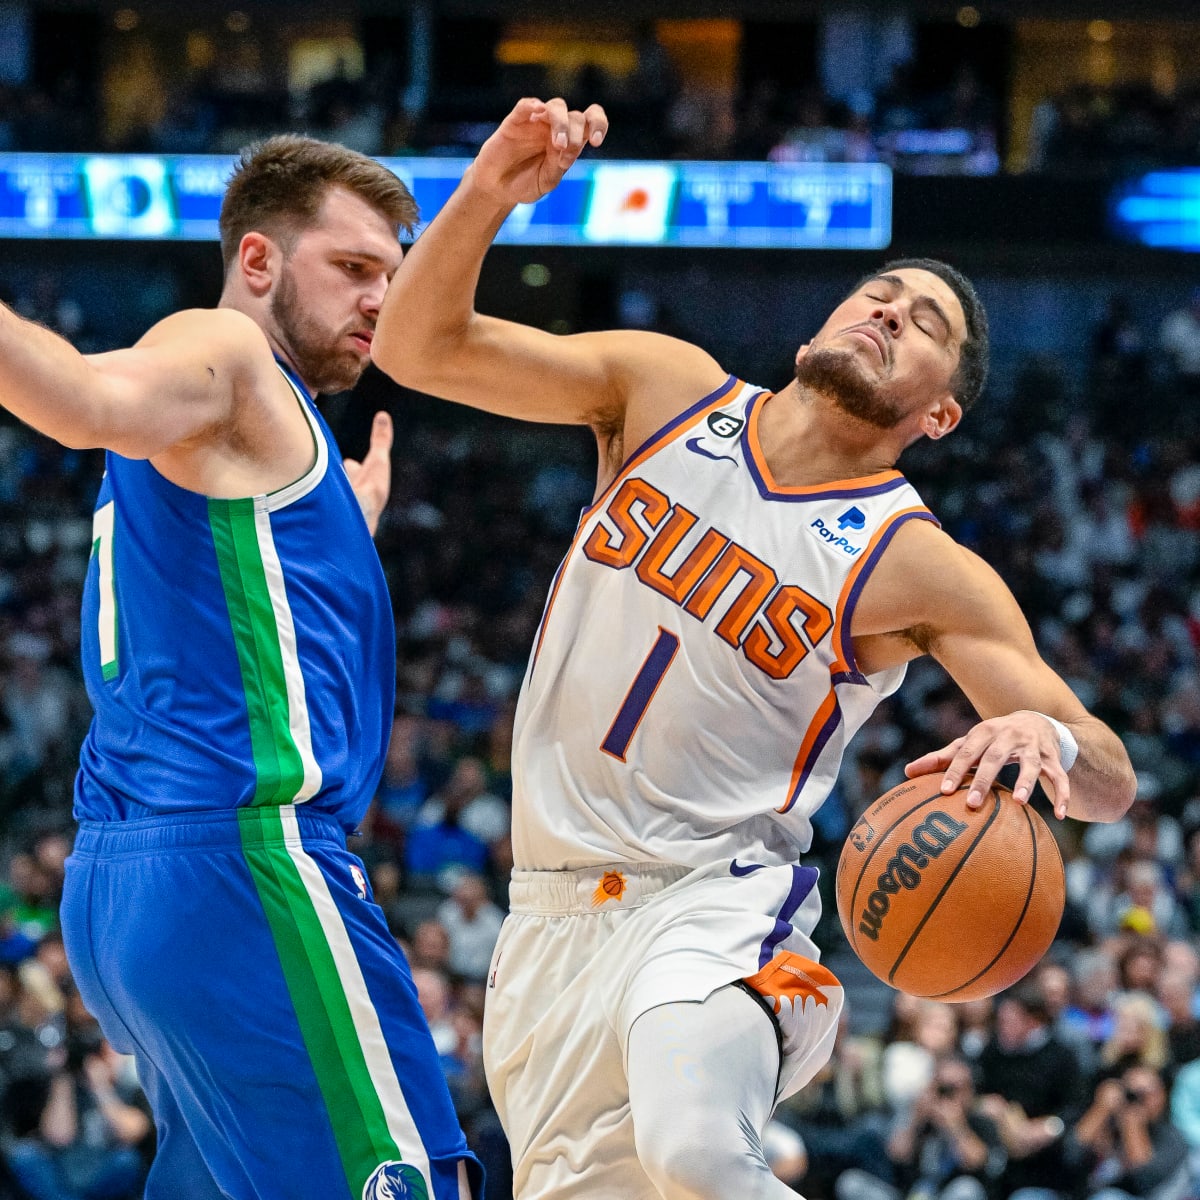 Luka Doncic's Mavericks to face Devin Booker's Suns on Christmas Day, per  report